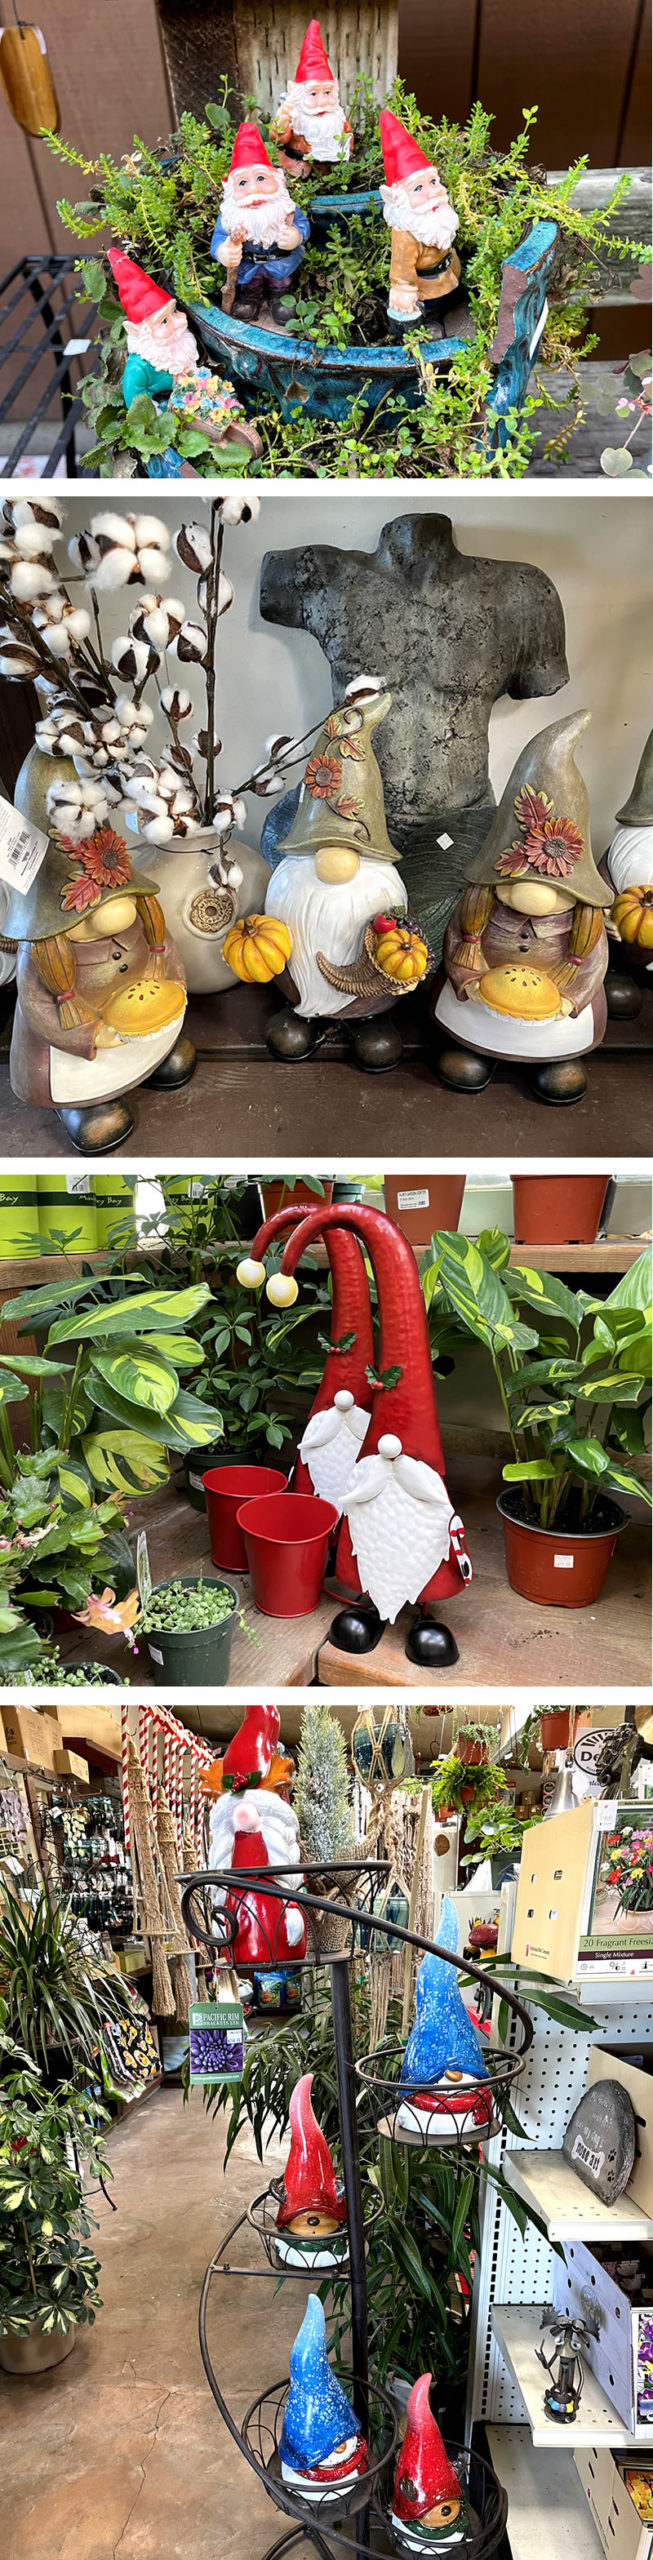 Photo collection of garden gnomes from various places in the nursery